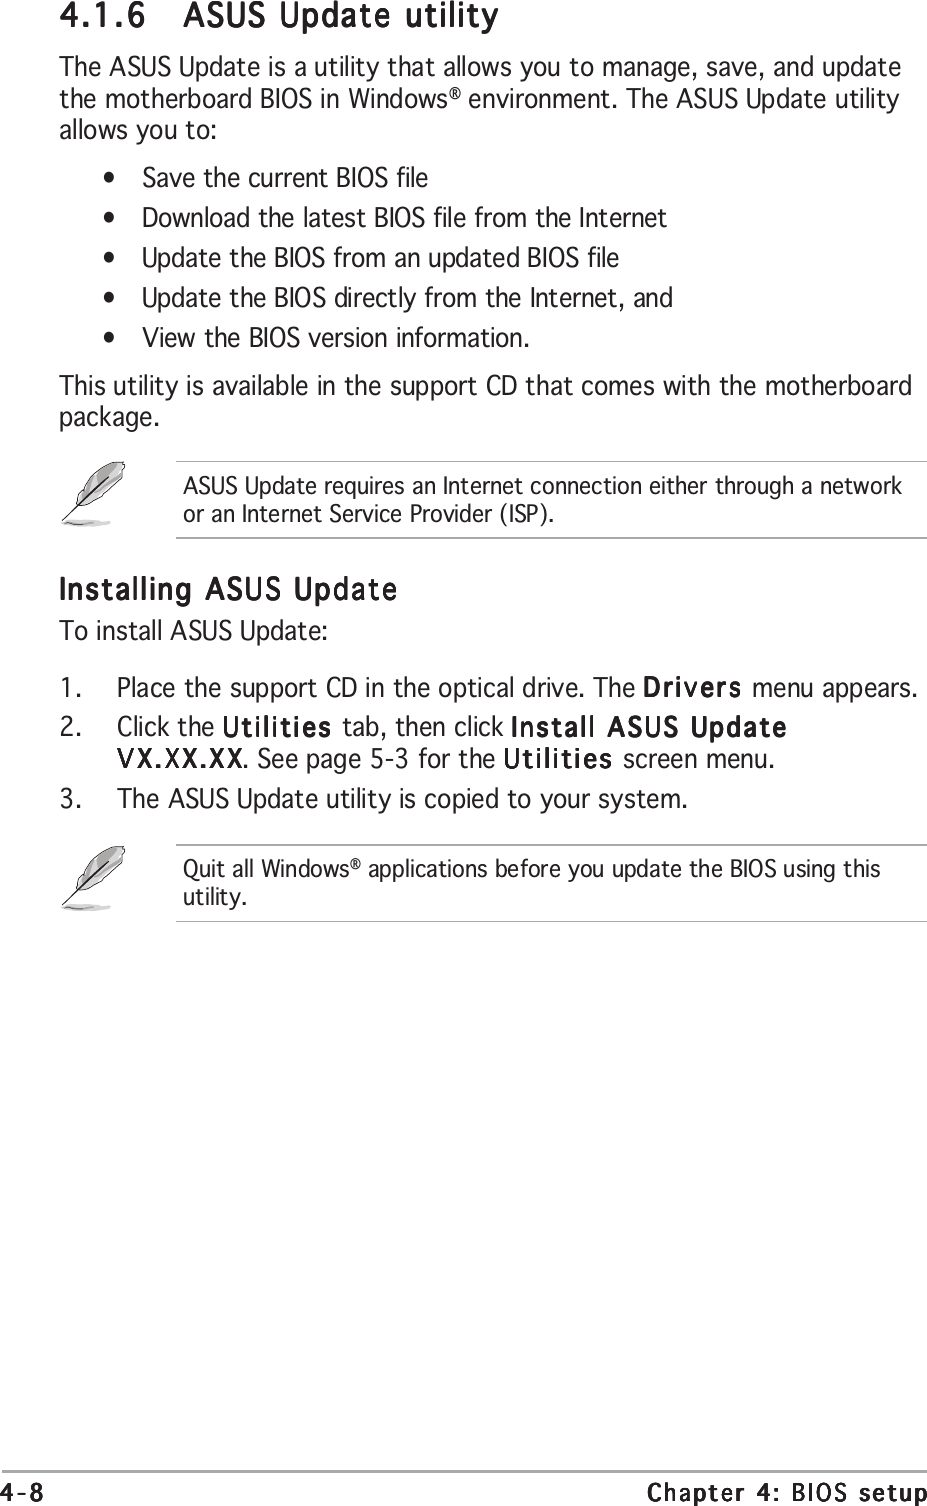 4-84-84-84-84-8 Chapter 4: BIOS setupChapter 4: BIOS setupChapter 4: BIOS setupChapter 4: BIOS setupChapter 4: BIOS setupInstalling ASUS UpdateInstalling ASUS UpdateInstalling ASUS UpdateInstalling ASUS UpdateInstalling ASUS UpdateTo install ASUS Update:1. Place the support CD in the optical drive. The Drivers Drivers Drivers Drivers Drivers menu appears.2. Click the Utilities Utilities Utilities Utilities Utilities tab, then click Install ASUS UpdateInstall ASUS UpdateInstall ASUS UpdateInstall ASUS UpdateInstall ASUS UpdateVX.XX.XXVX.XX.XXVX.XX.XXVX.XX.XXVX.XX.XX. See page 5-3 for the Utilities Utilities Utilities Utilities Utilities screen menu.3. The ASUS Update utility is copied to your system.4.1.64.1.64.1.64.1.64.1.6 ASUS Update utilityASUS Update utilityASUS Update utilityASUS Update utilityASUS Update utilityThe ASUS Update is a utility that allows you to manage, save, and updatethe motherboard BIOS in Windows® environment. The ASUS Update utilityallows you to:•Save the current BIOS file•Download the latest BIOS file from the Internet•Update the BIOS from an updated BIOS file•Update the BIOS directly from the Internet, and•View the BIOS version information.This utility is available in the support CD that comes with the motherboardpackage.ASUS Update requires an Internet connection either through a networkor an Internet Service Provider (ISP).Quit all Windows® applications before you update the BIOS using thisutility.